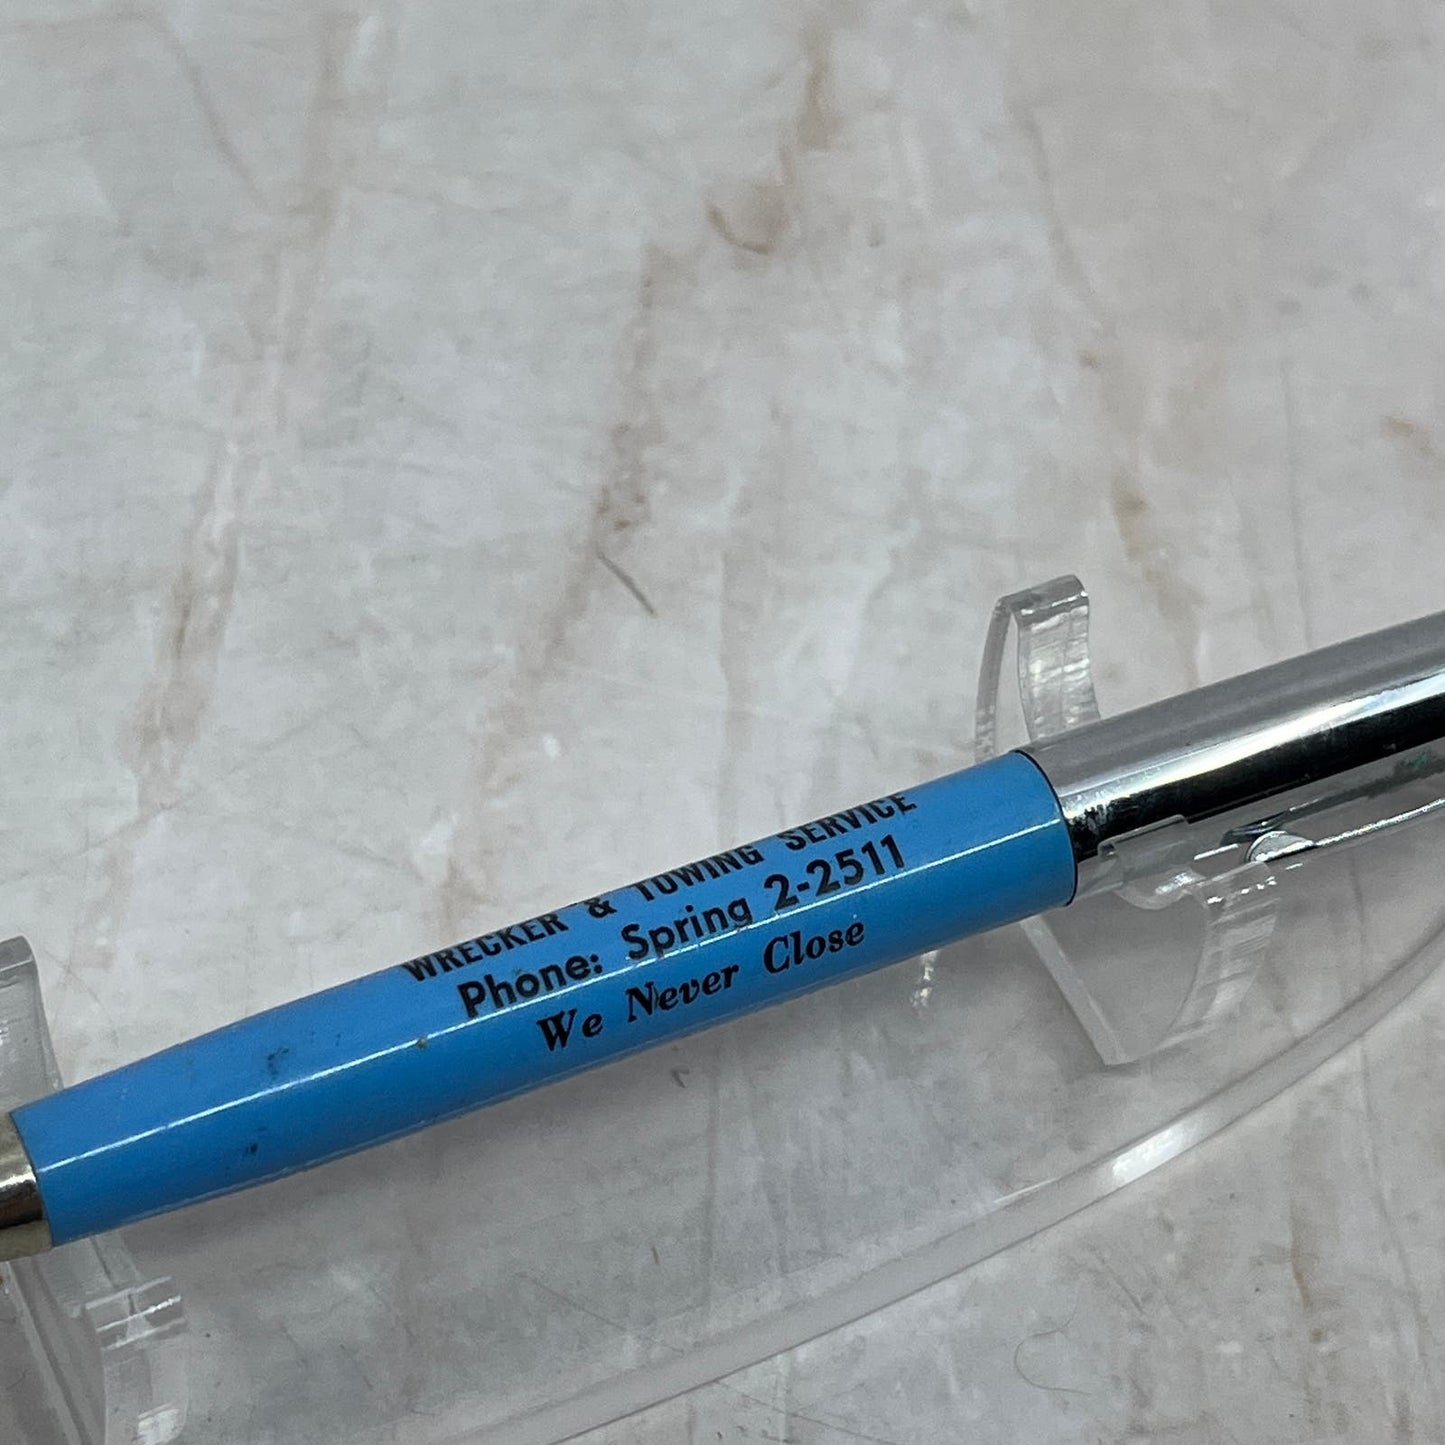 Charlie's Wrecker & Towing Service Sample Advertising Mechanical Pencil SB3-P3